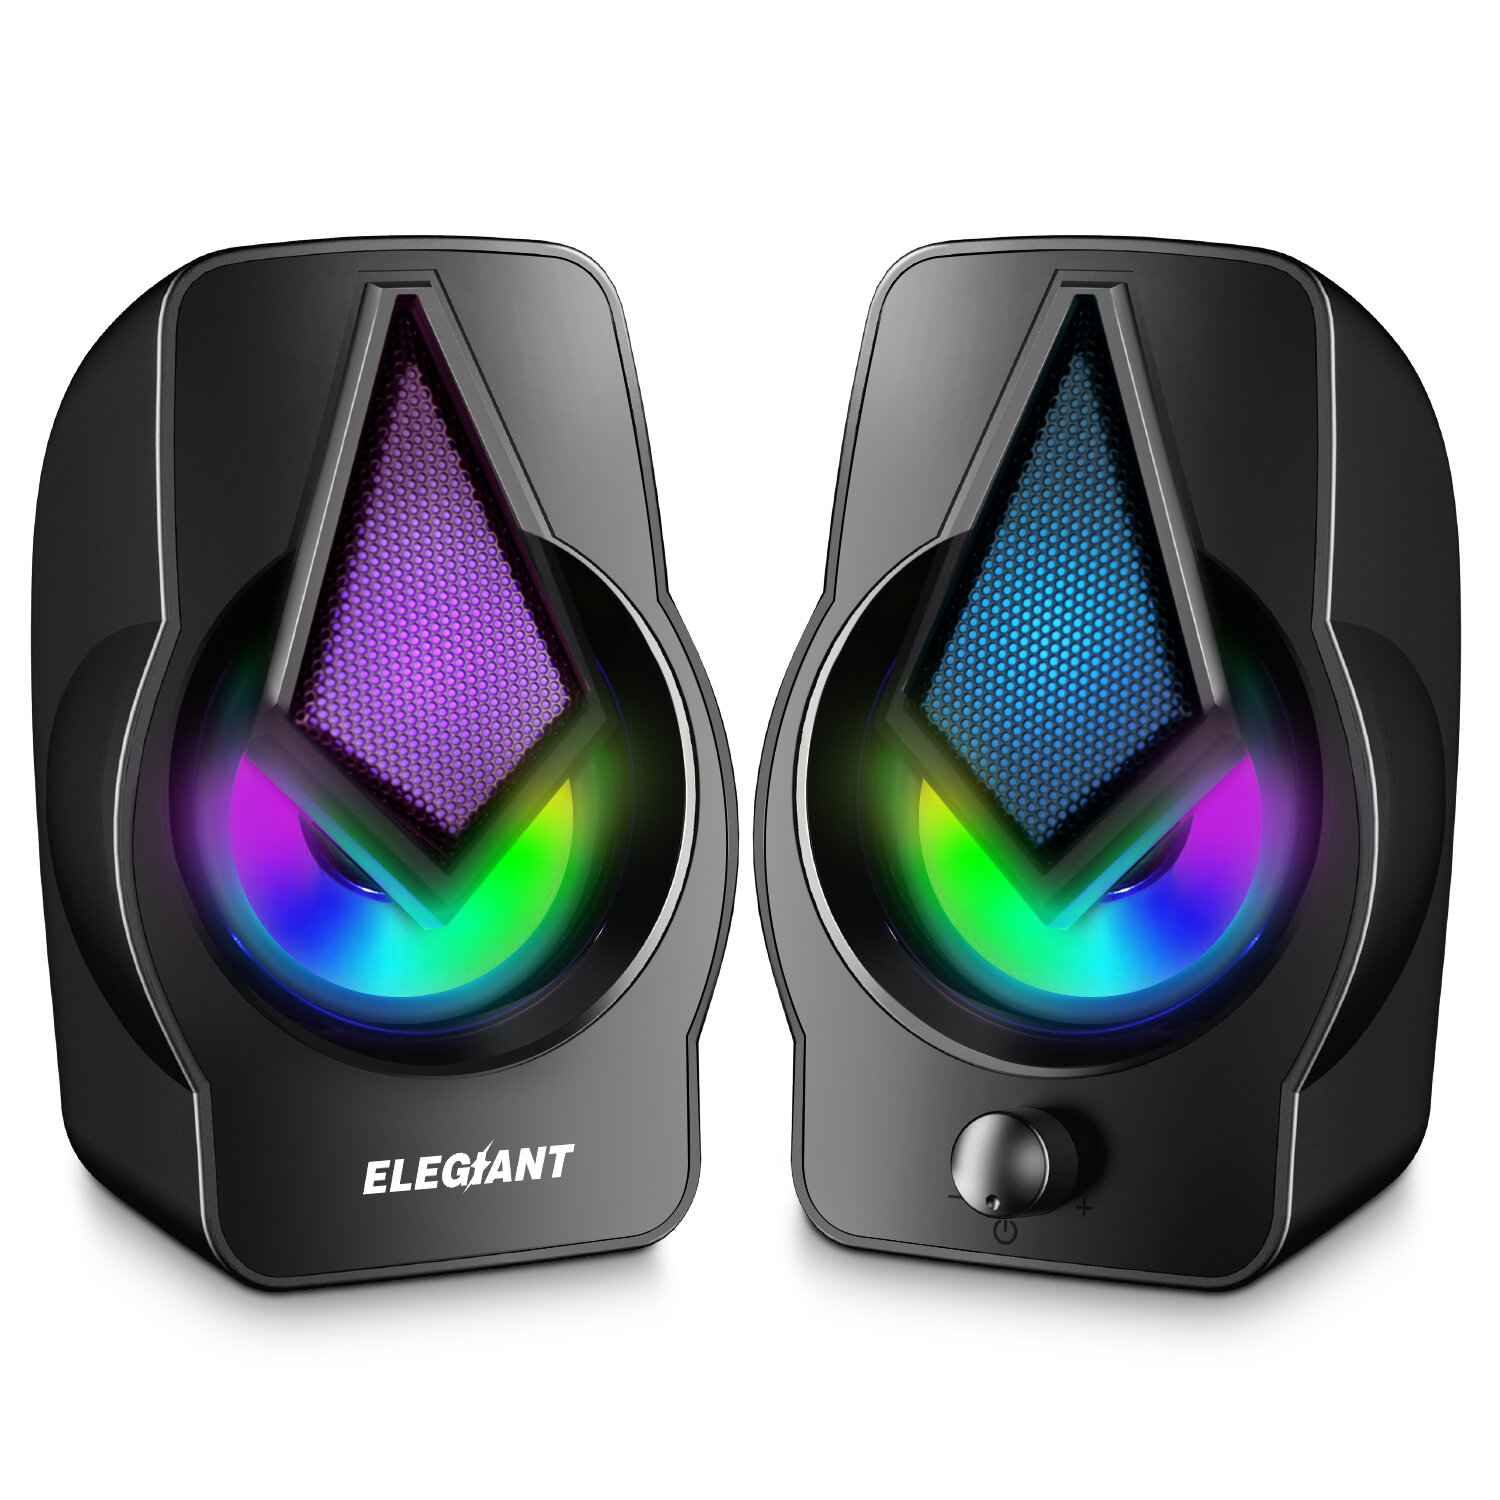 

ELEGIANT PC Speakers 2.0 USB Powered Stereo Volume Control with LED Light Mini Portable Gaming Speakers 3.5mm for PC Cel